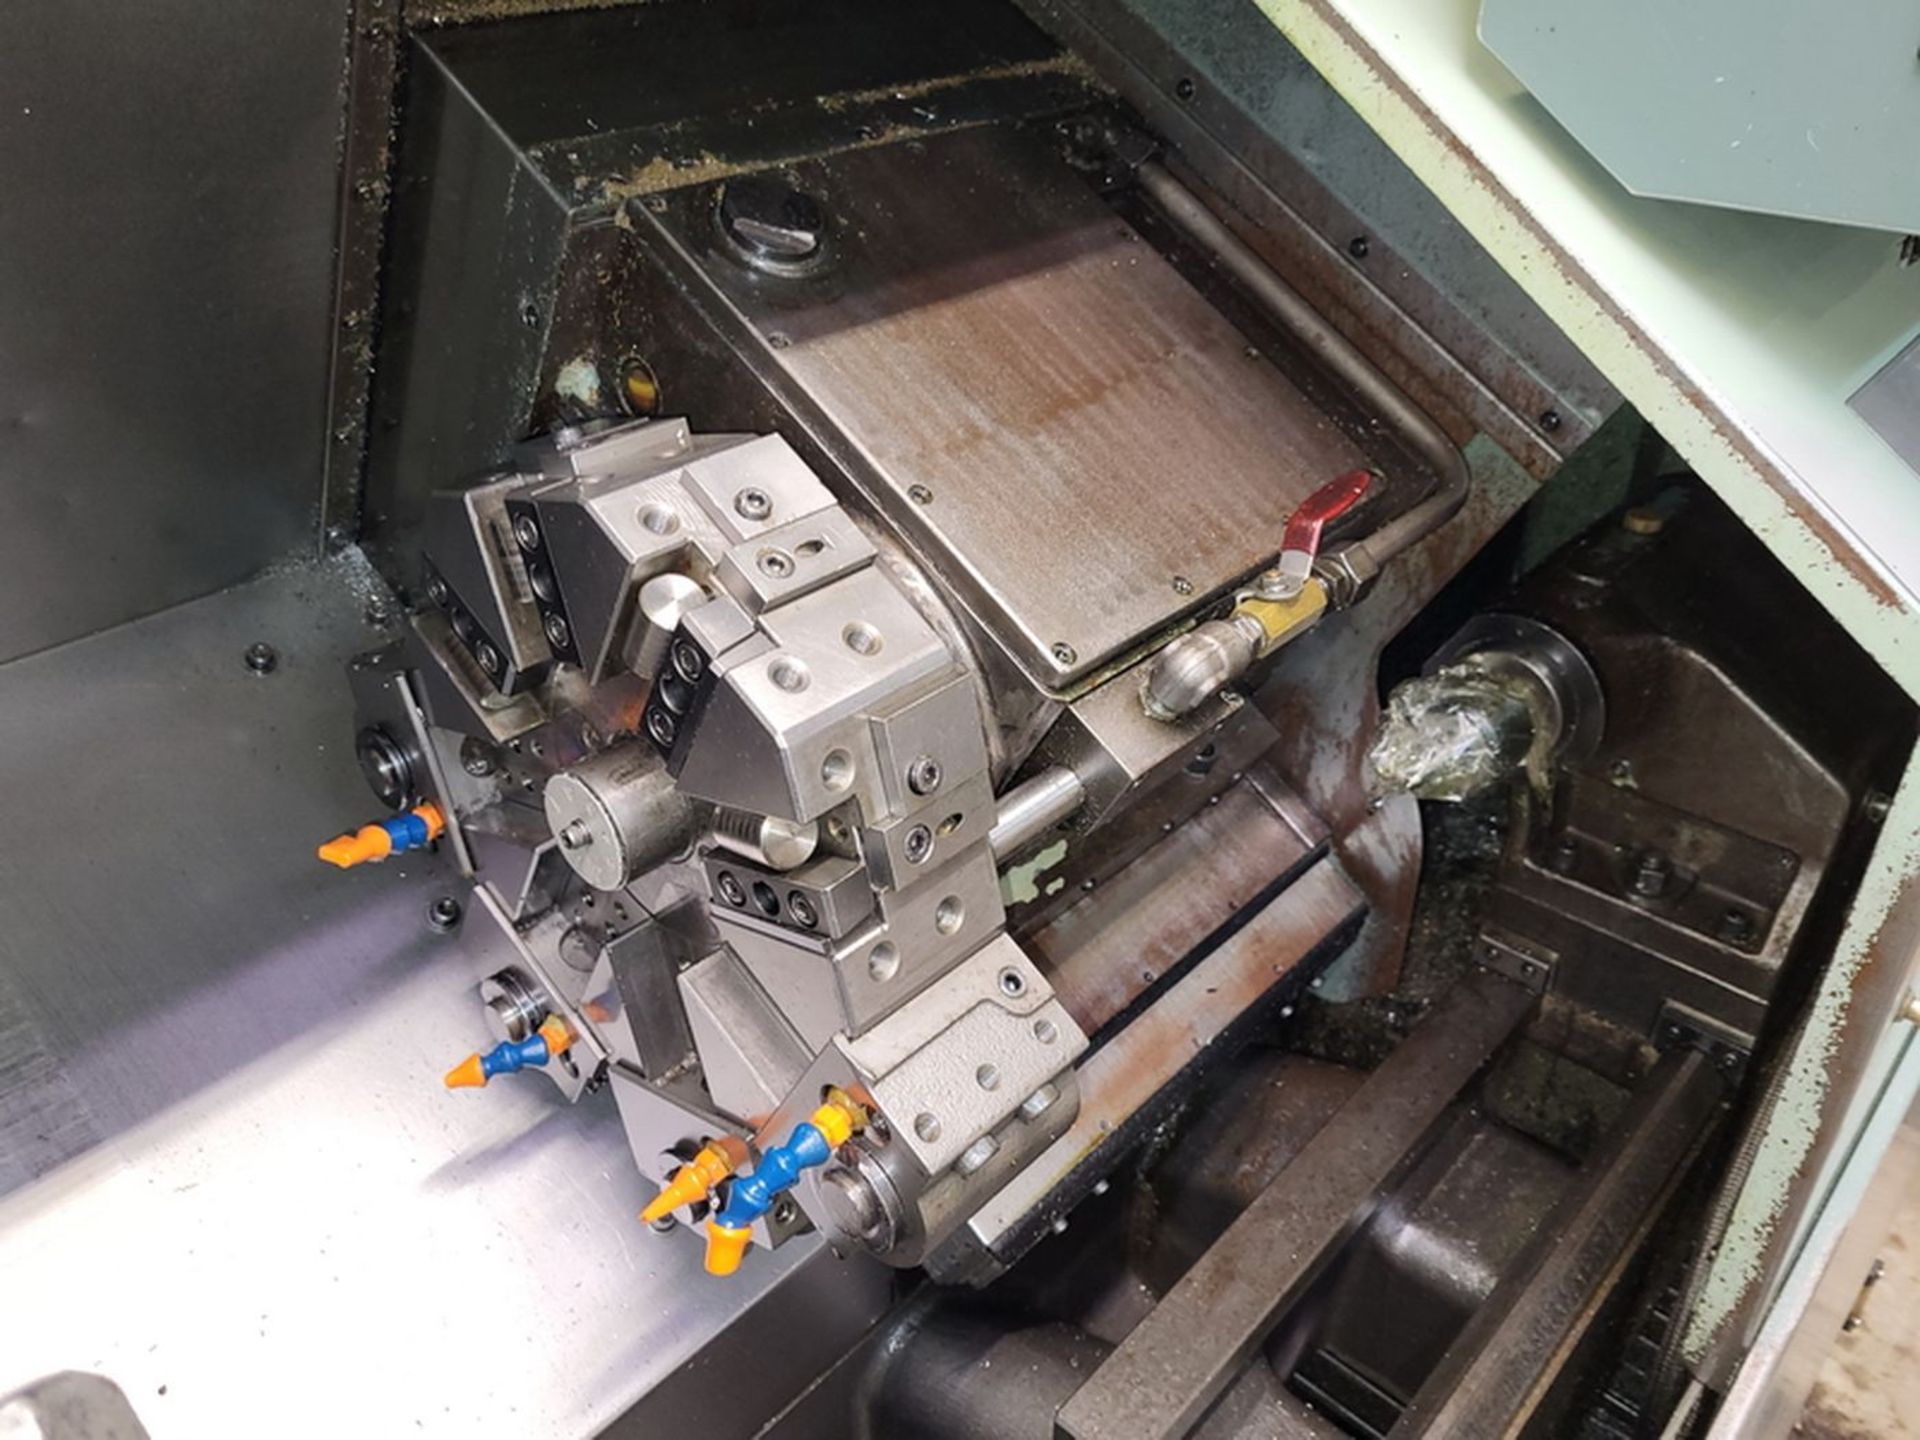 Mori Seiki Model AL-2ATM CNC Lathe, S/N: 937; with 8-Position Turret, Collet Chuck, Tool Setter, - Image 5 of 13